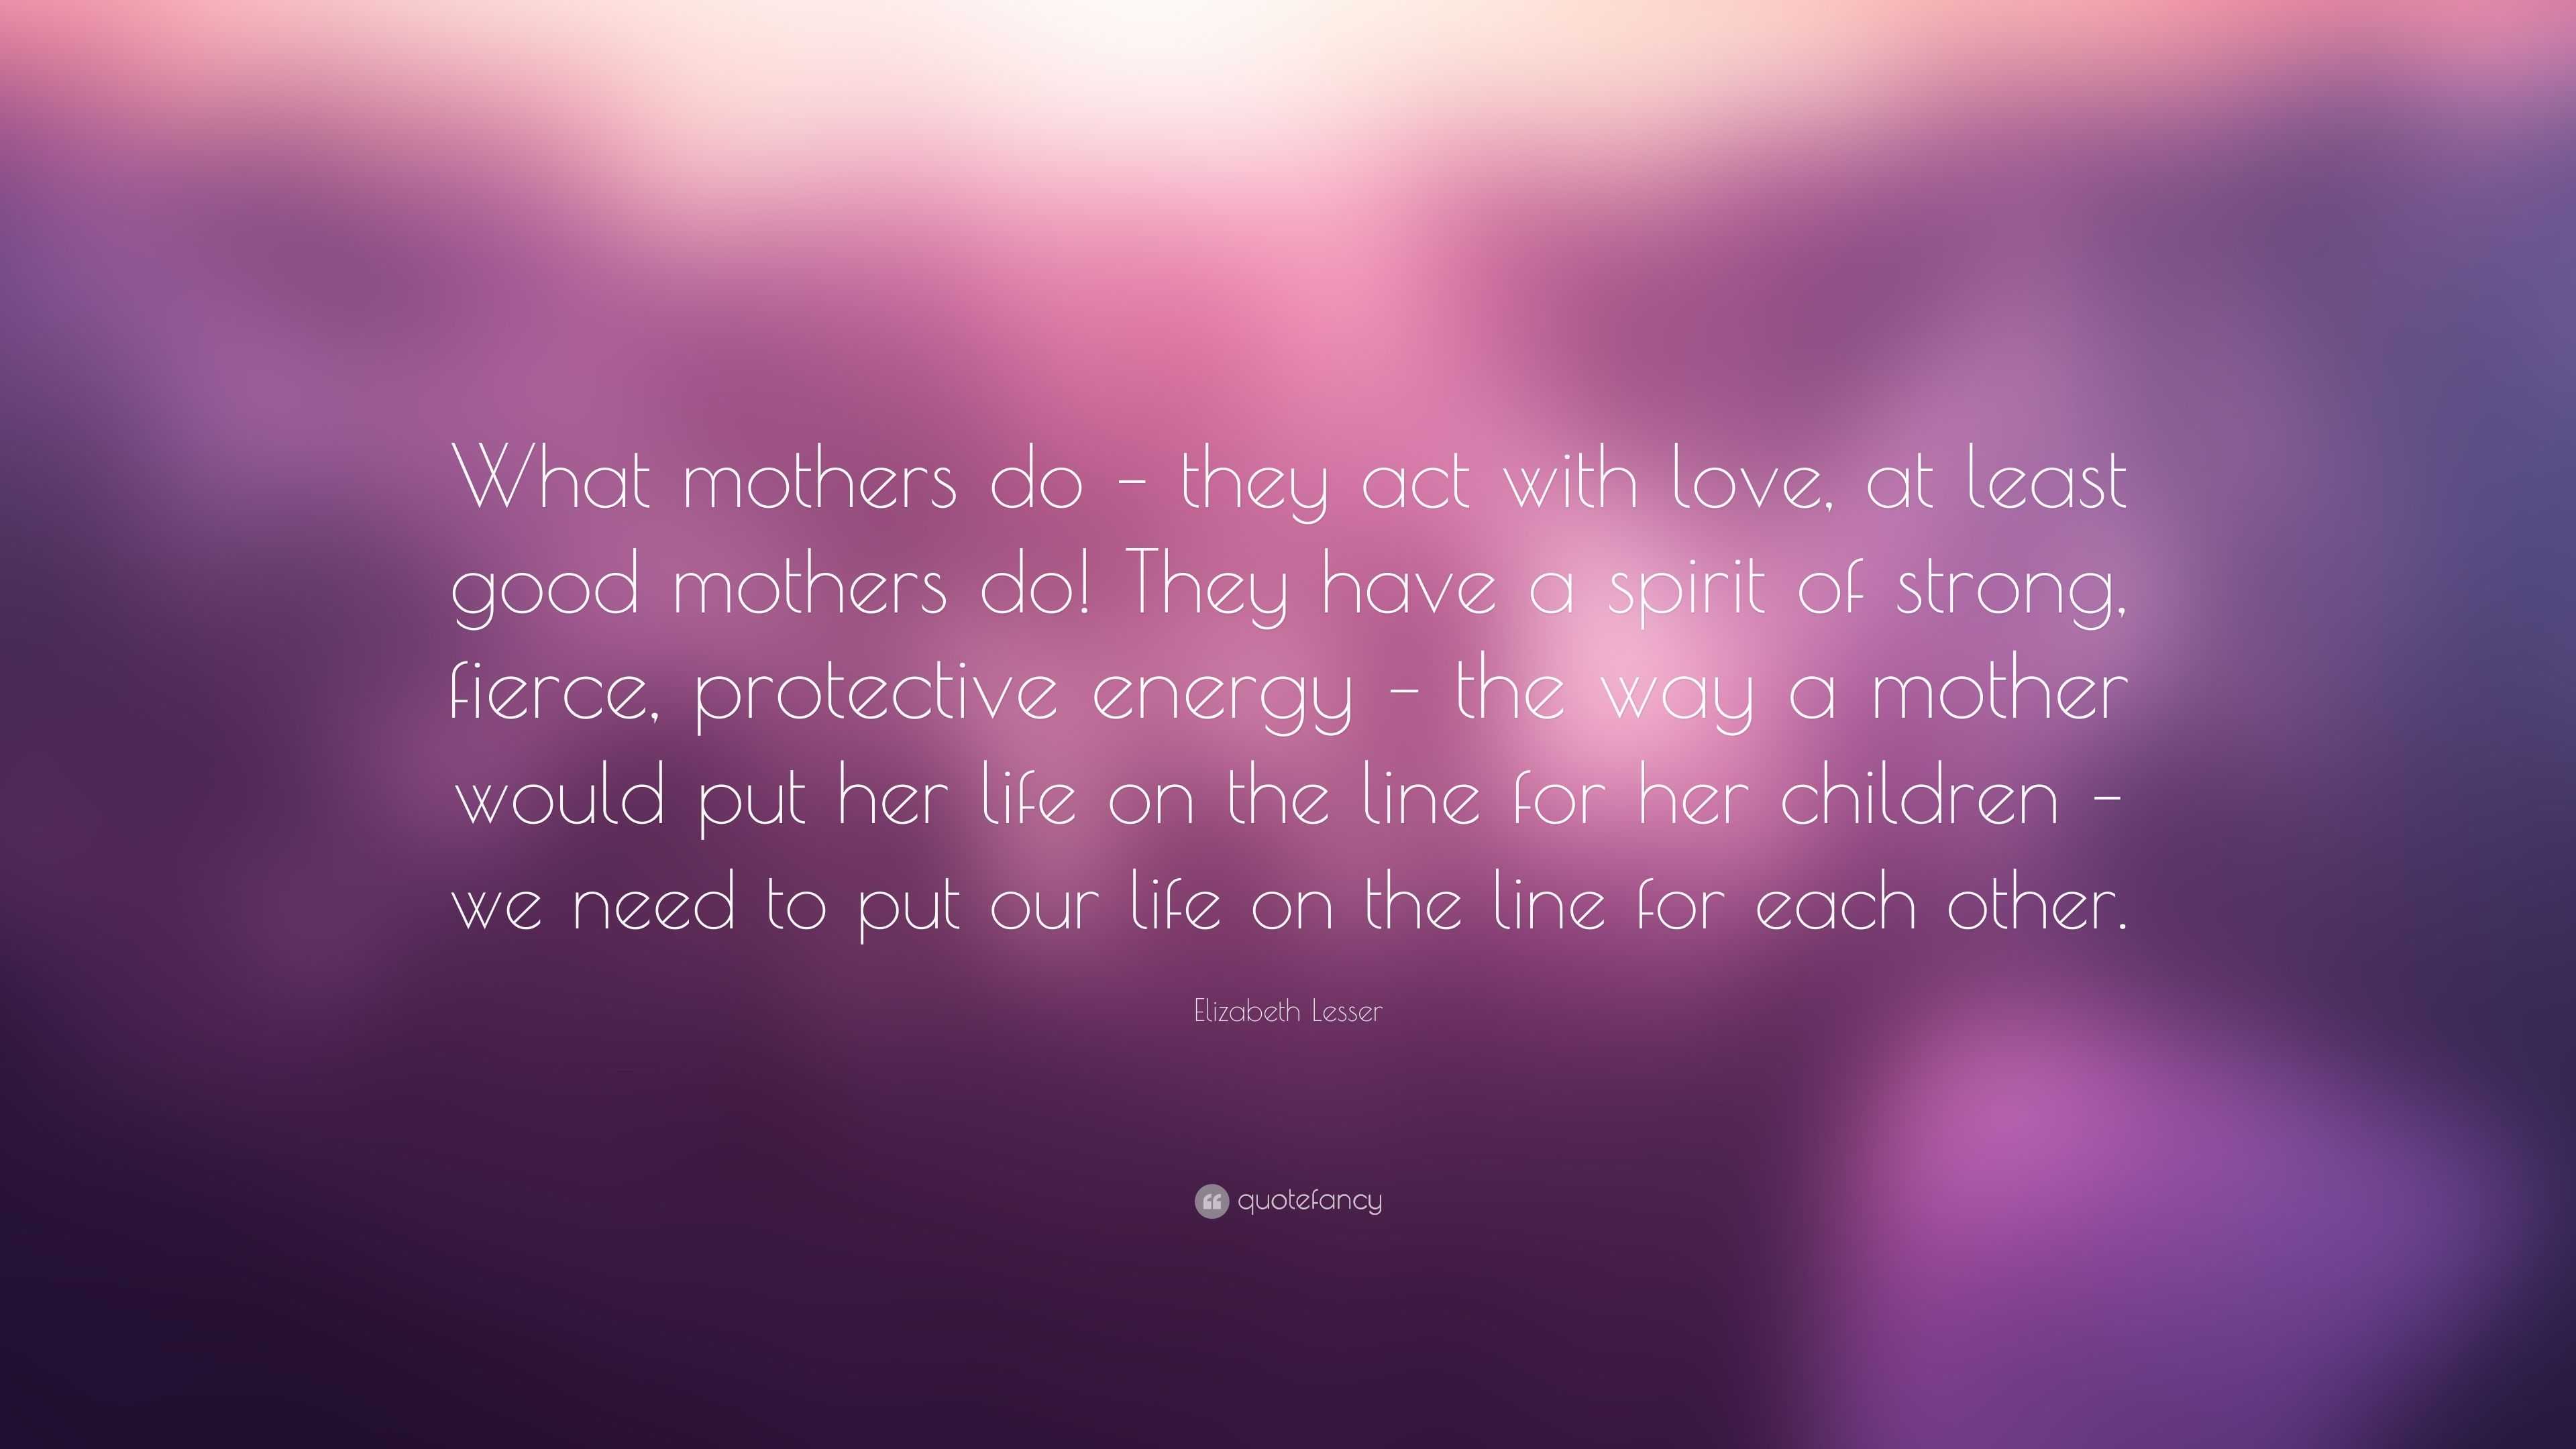 Elizabeth Lesser Quote “What mothers do – they act with love at least